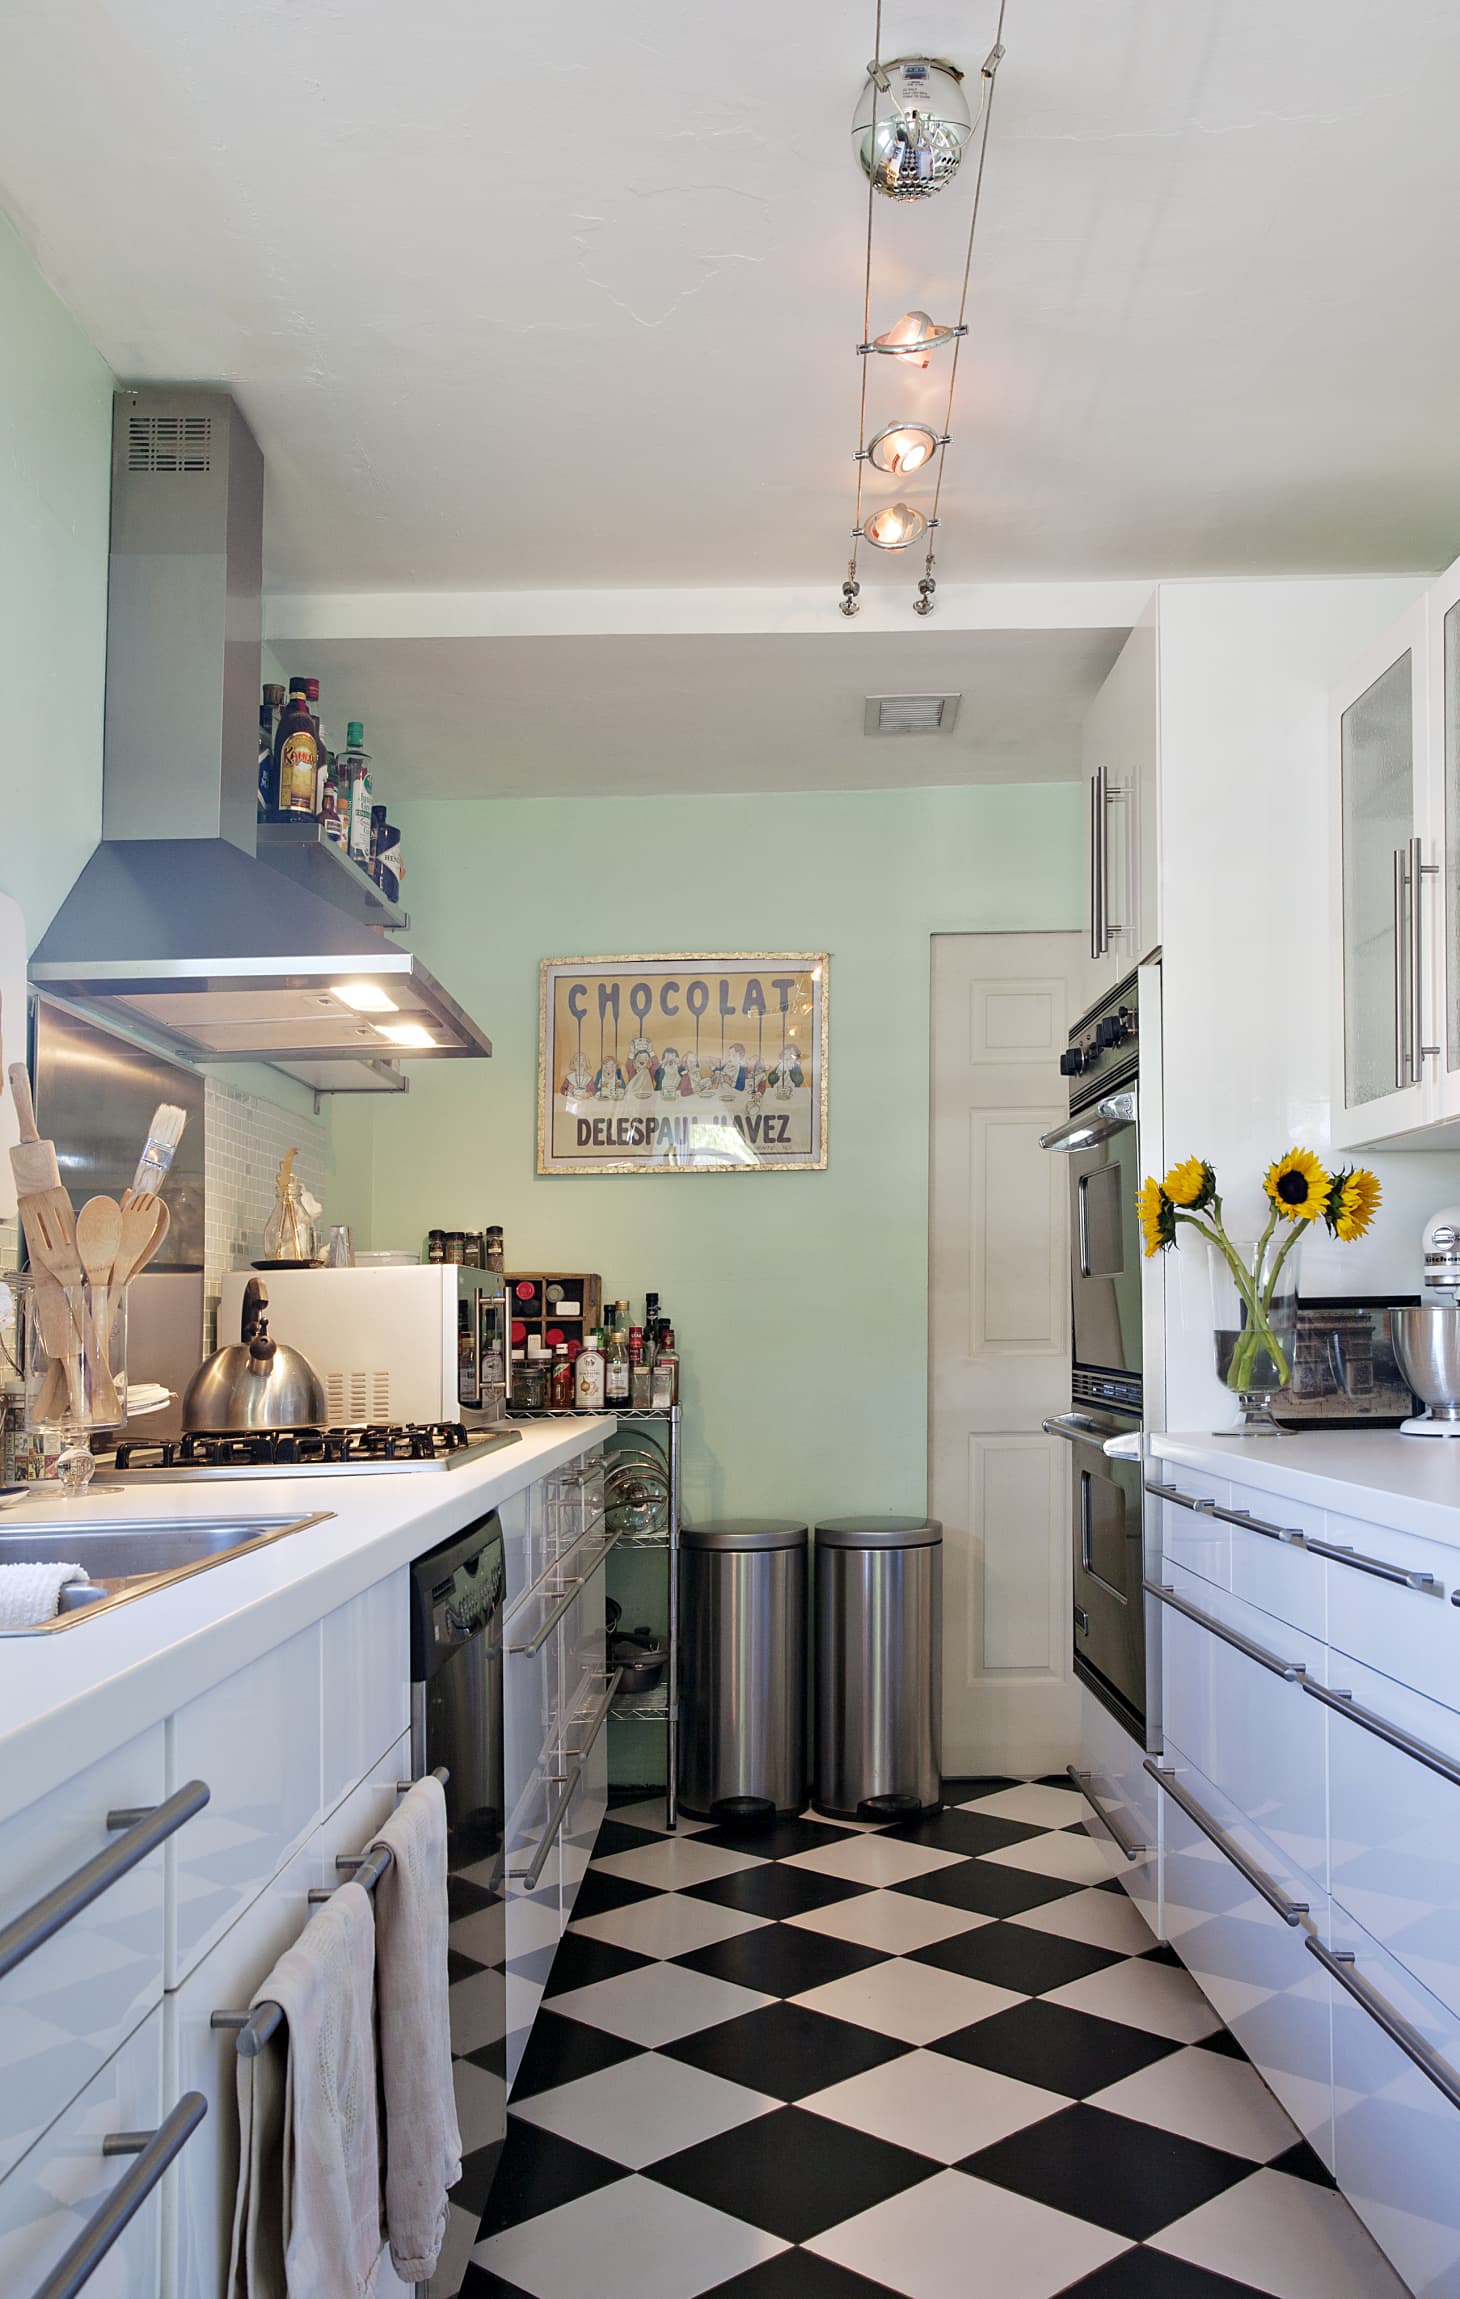 6 Ways to Make a Small Kitchen Look Infinitely Bigger